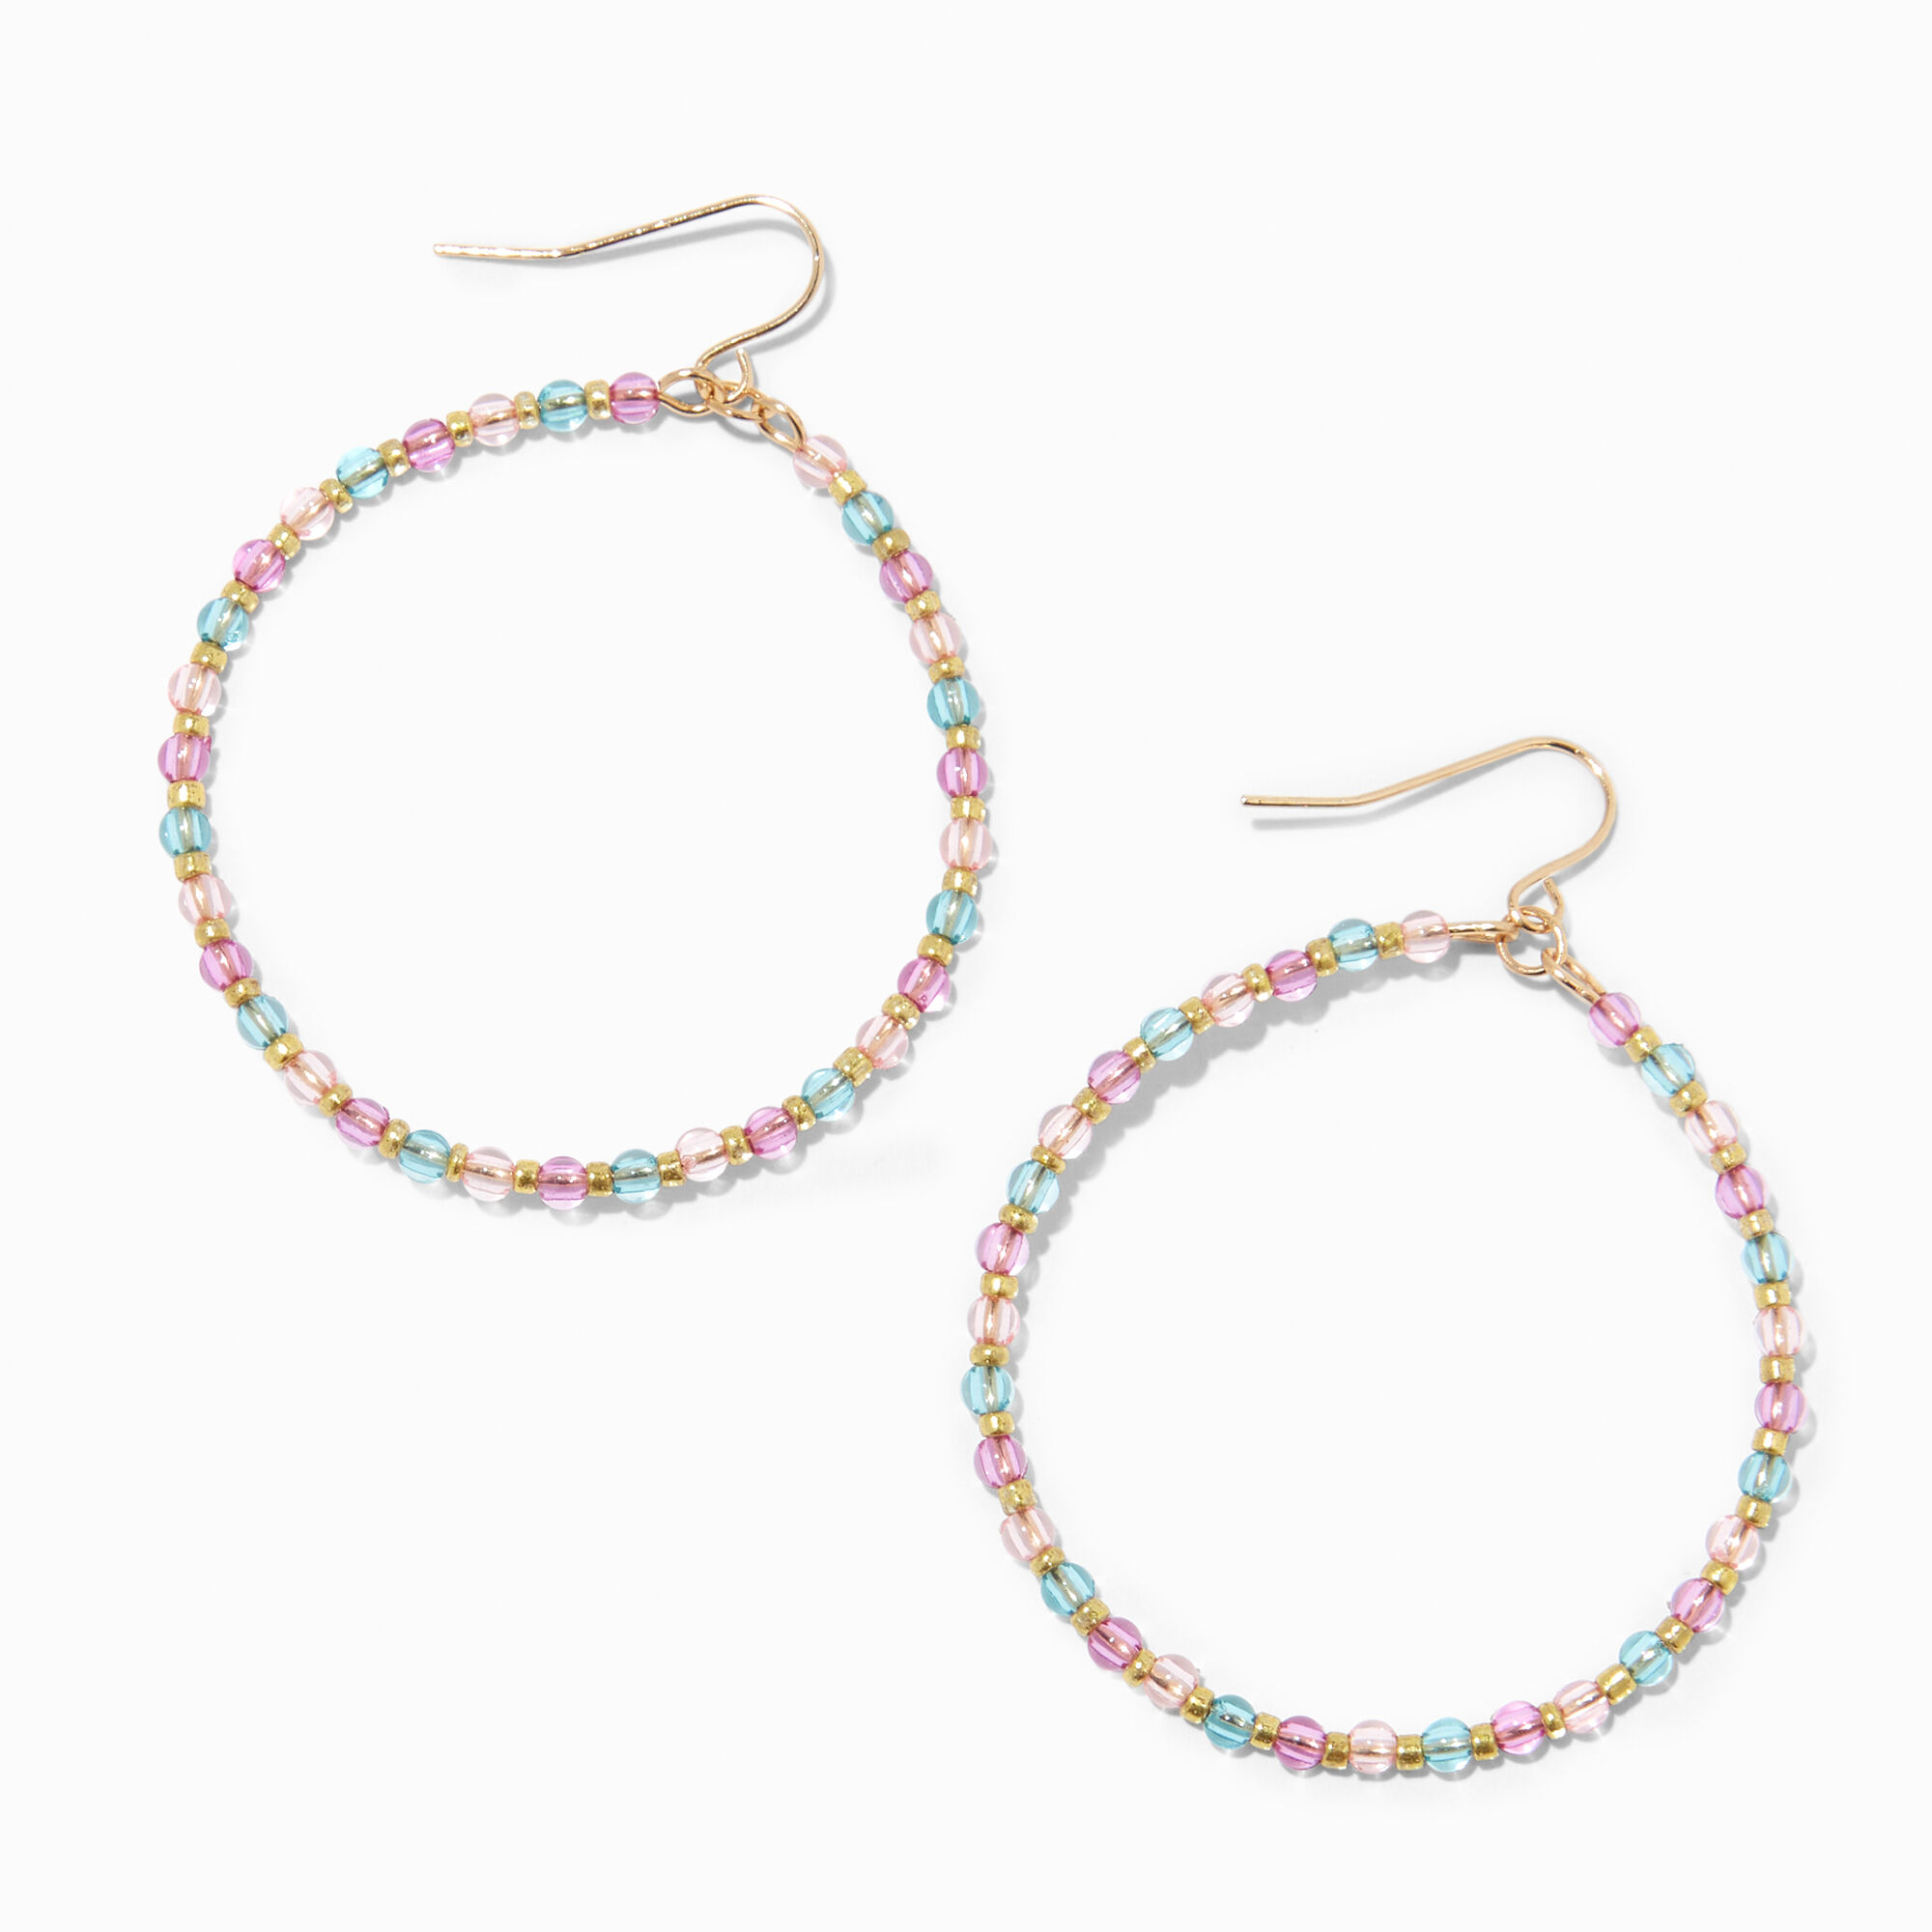 View Claires Tone Rainbow Beads 1 Hoop Drop Earrings Gold information